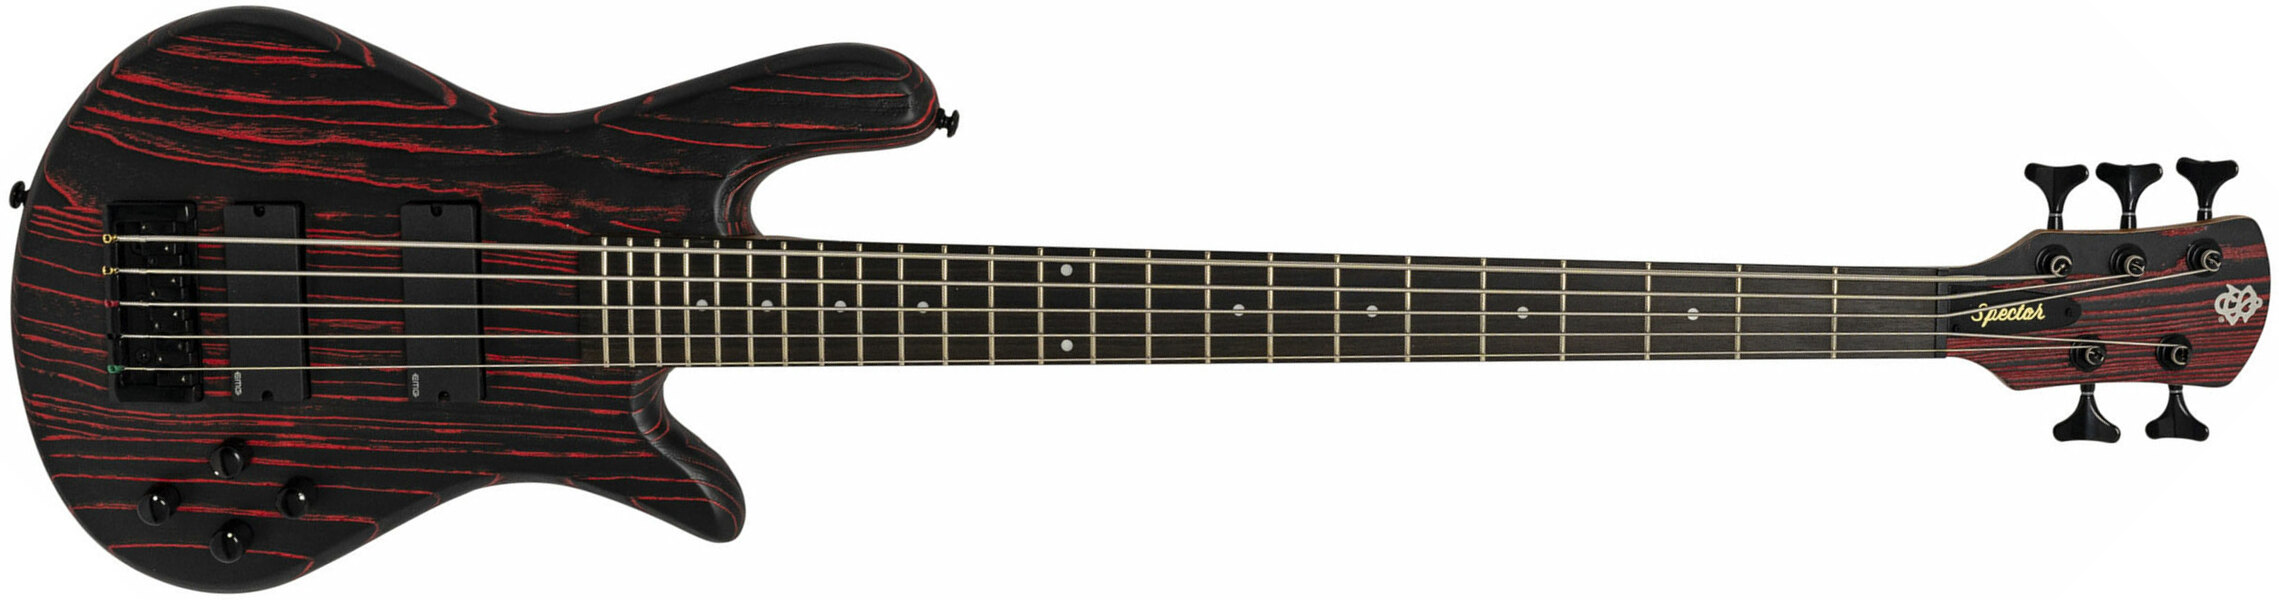 Spector Ns Pulse I 5c Active Emg Eb - Cinder Red - Solid body elektrische bas - Main picture